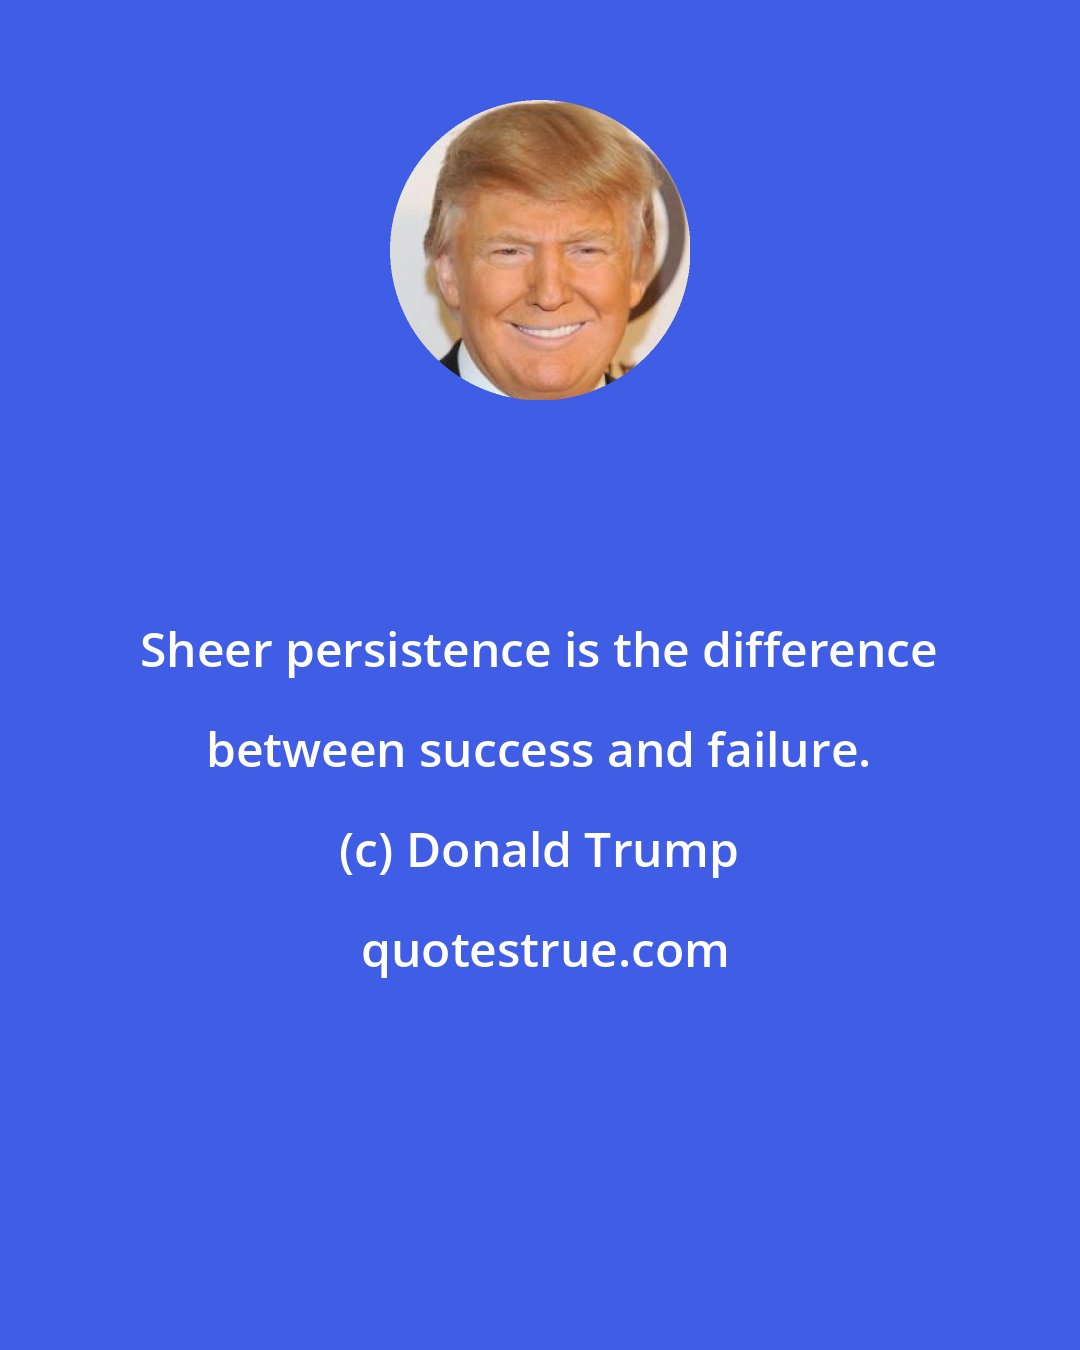 Donald Trump: Sheer persistence is the difference between success and failure.